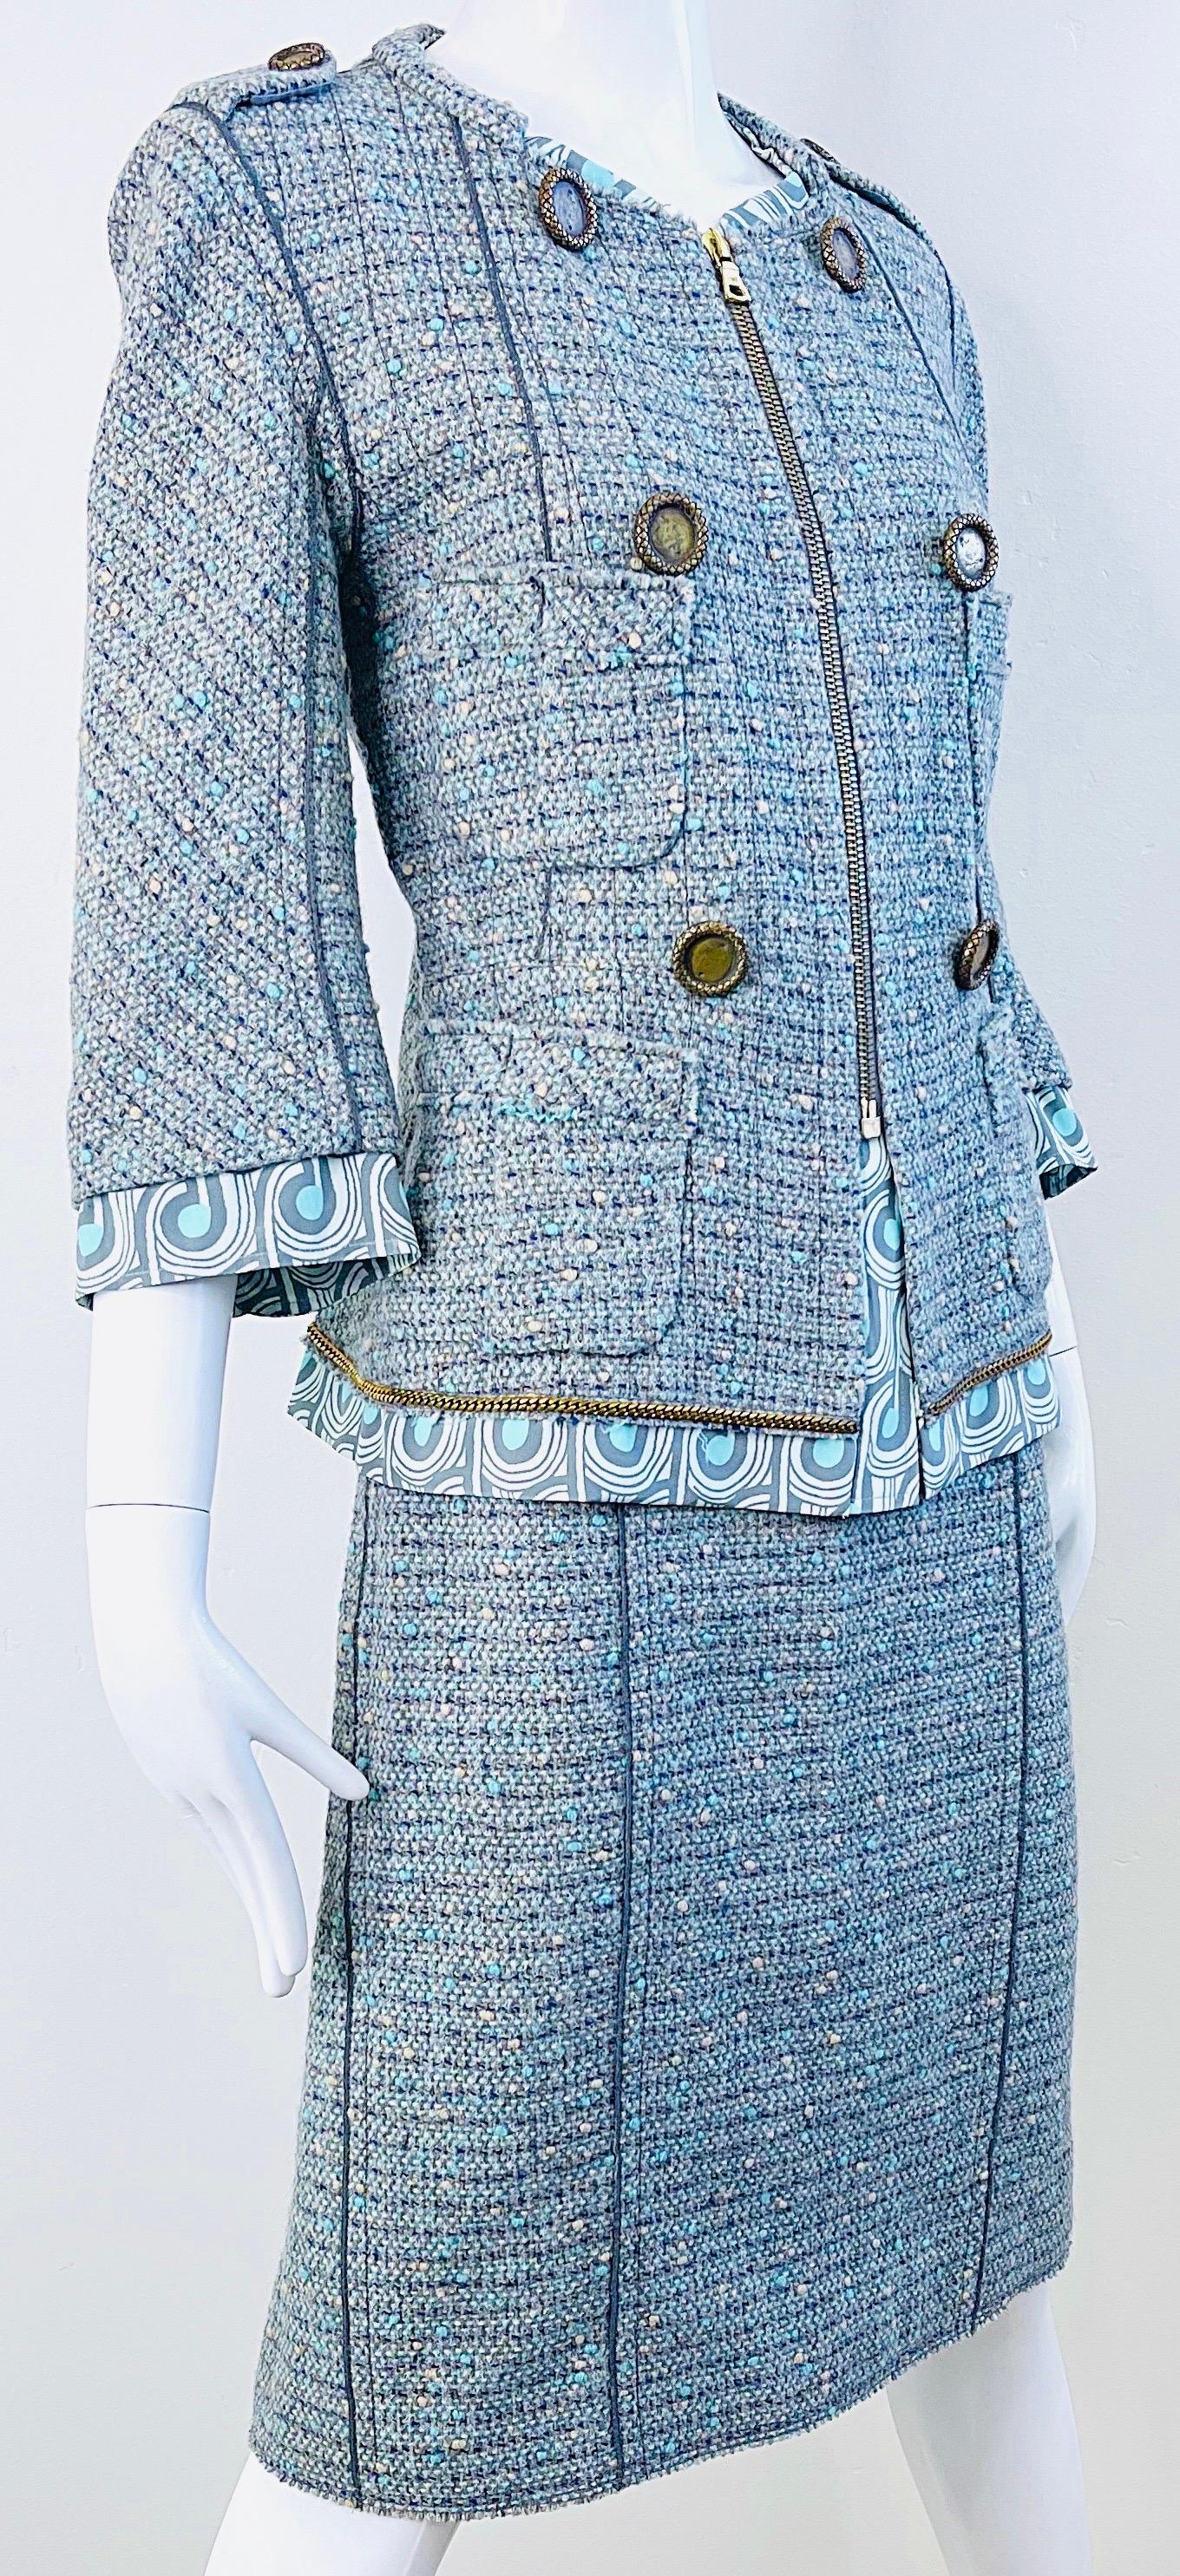 Marc Jacobs Spring 2005 Size 8 Blue Green Fantasy Tweed Wool Skirt Suit For Sale 5